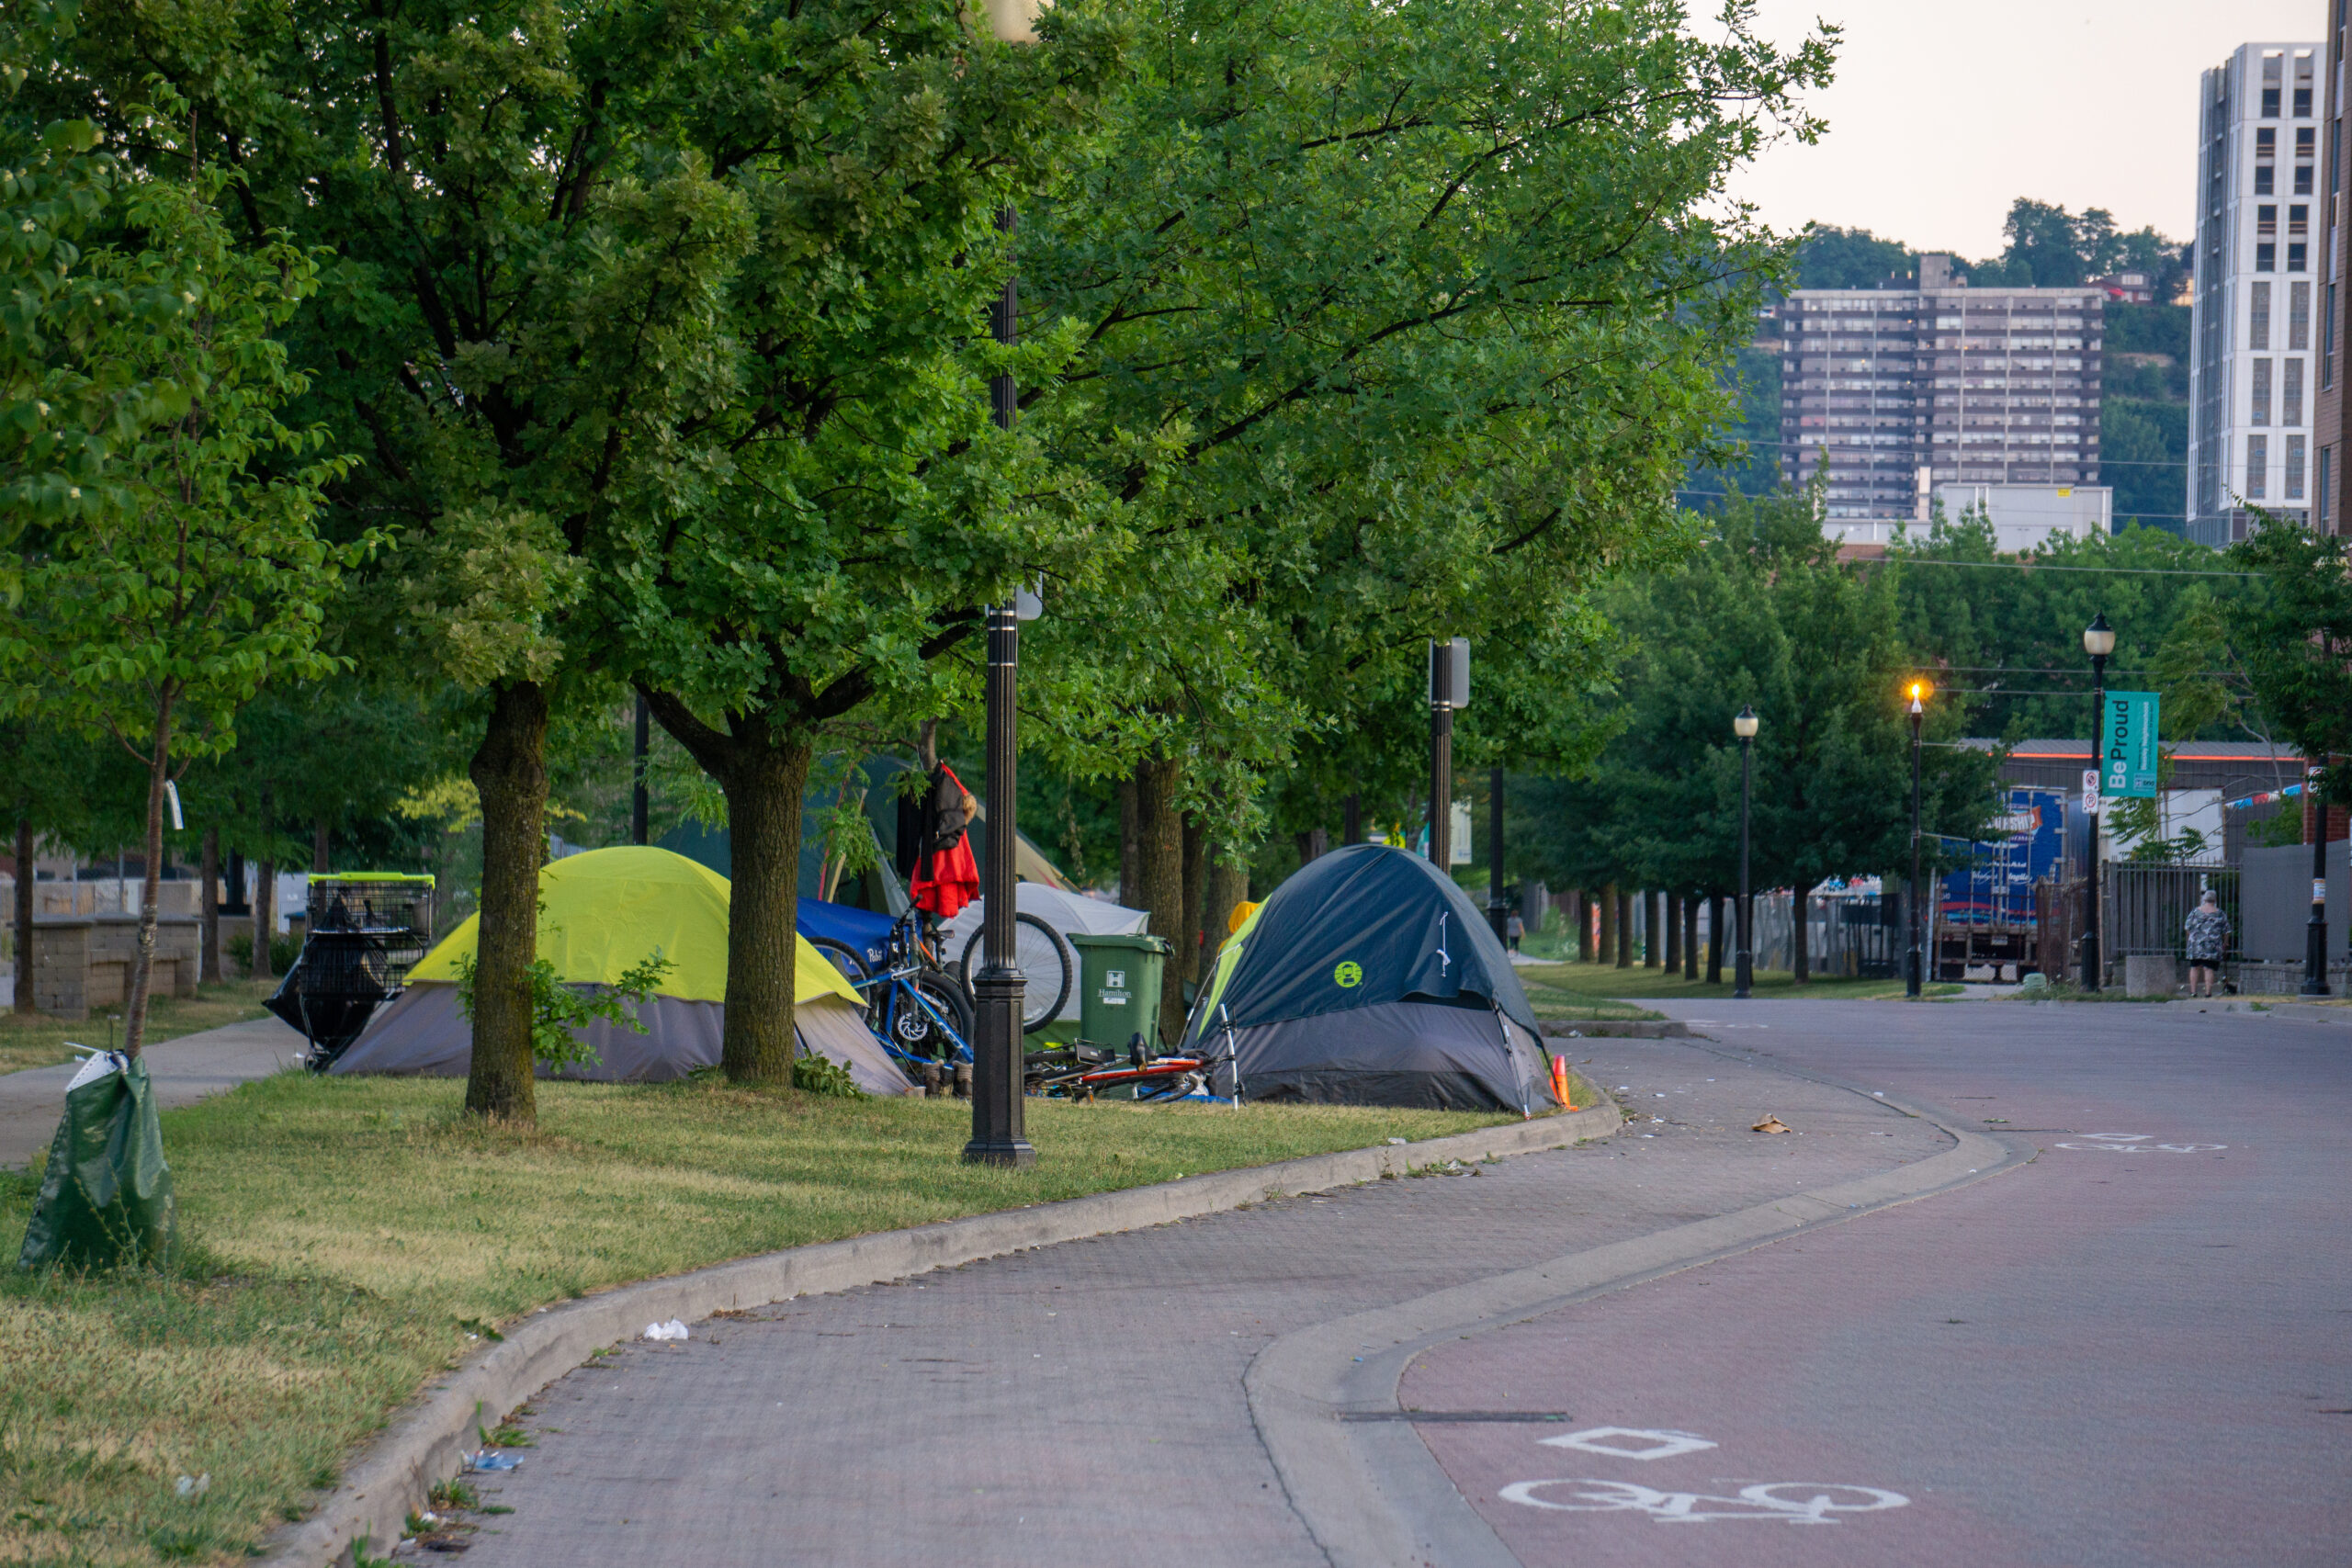 photos shows a group of tents alongside a roadway